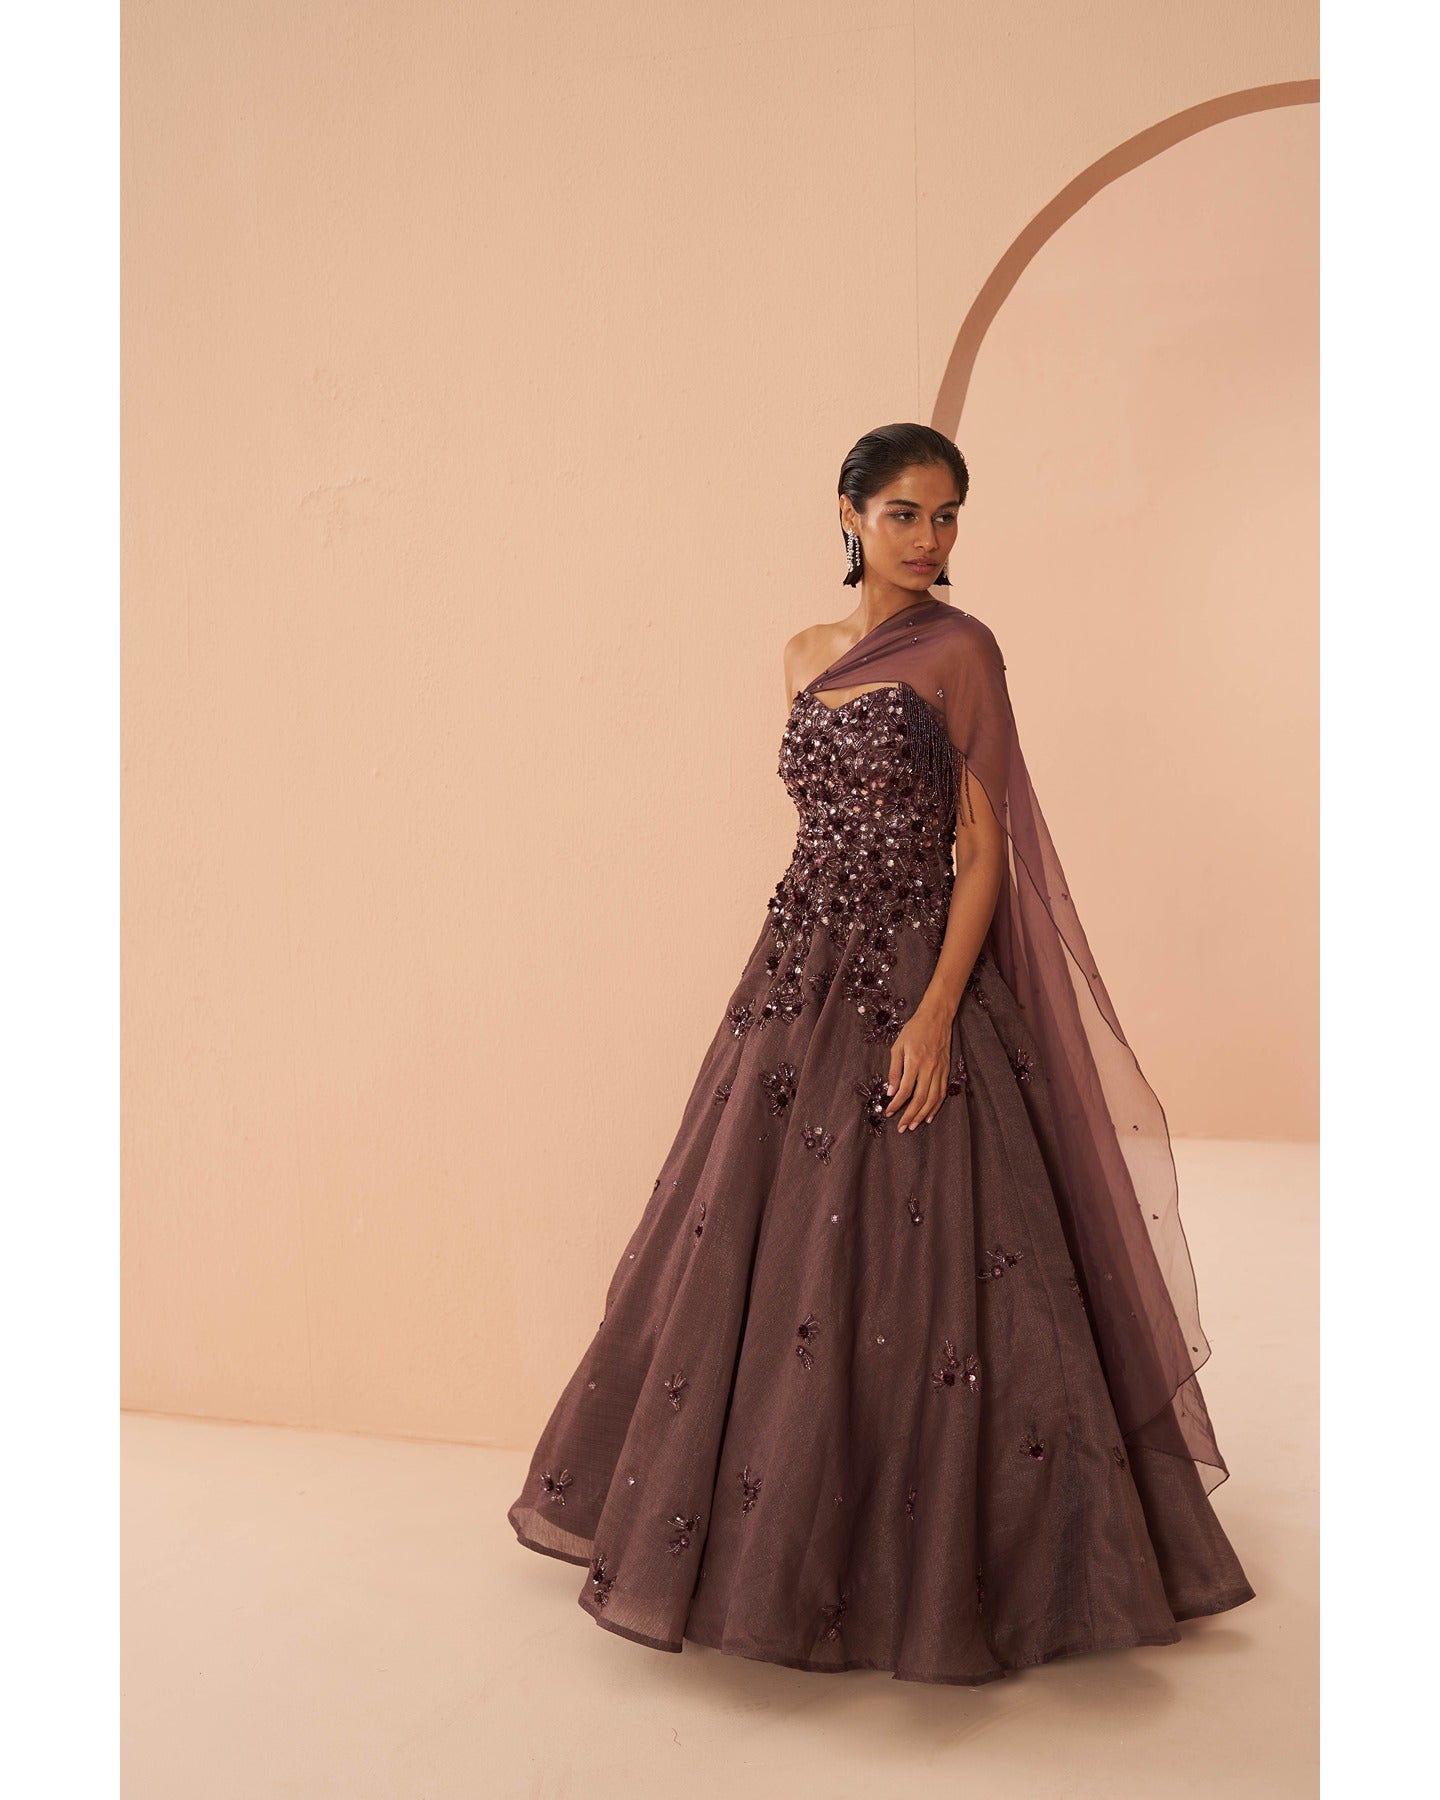 Wine Elegance: Adorned with intricate hand embroidery, this gown is a rich tapestry of sophistication and glamour.